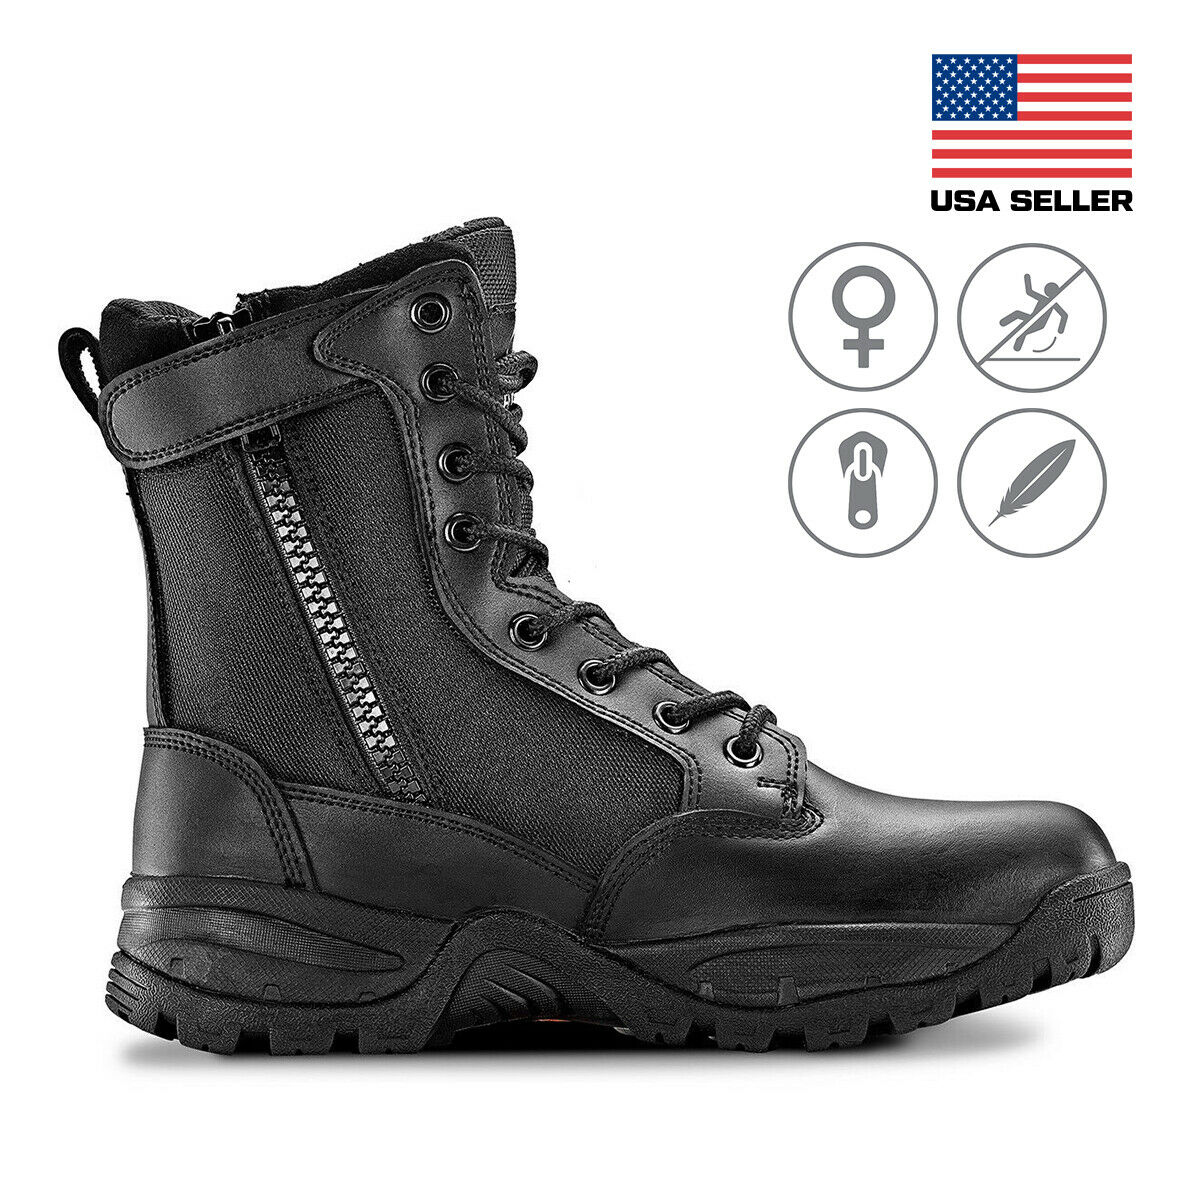 Maelstrom® Tac Force 8'' Women's Military Tactical Work Boots With Zipper